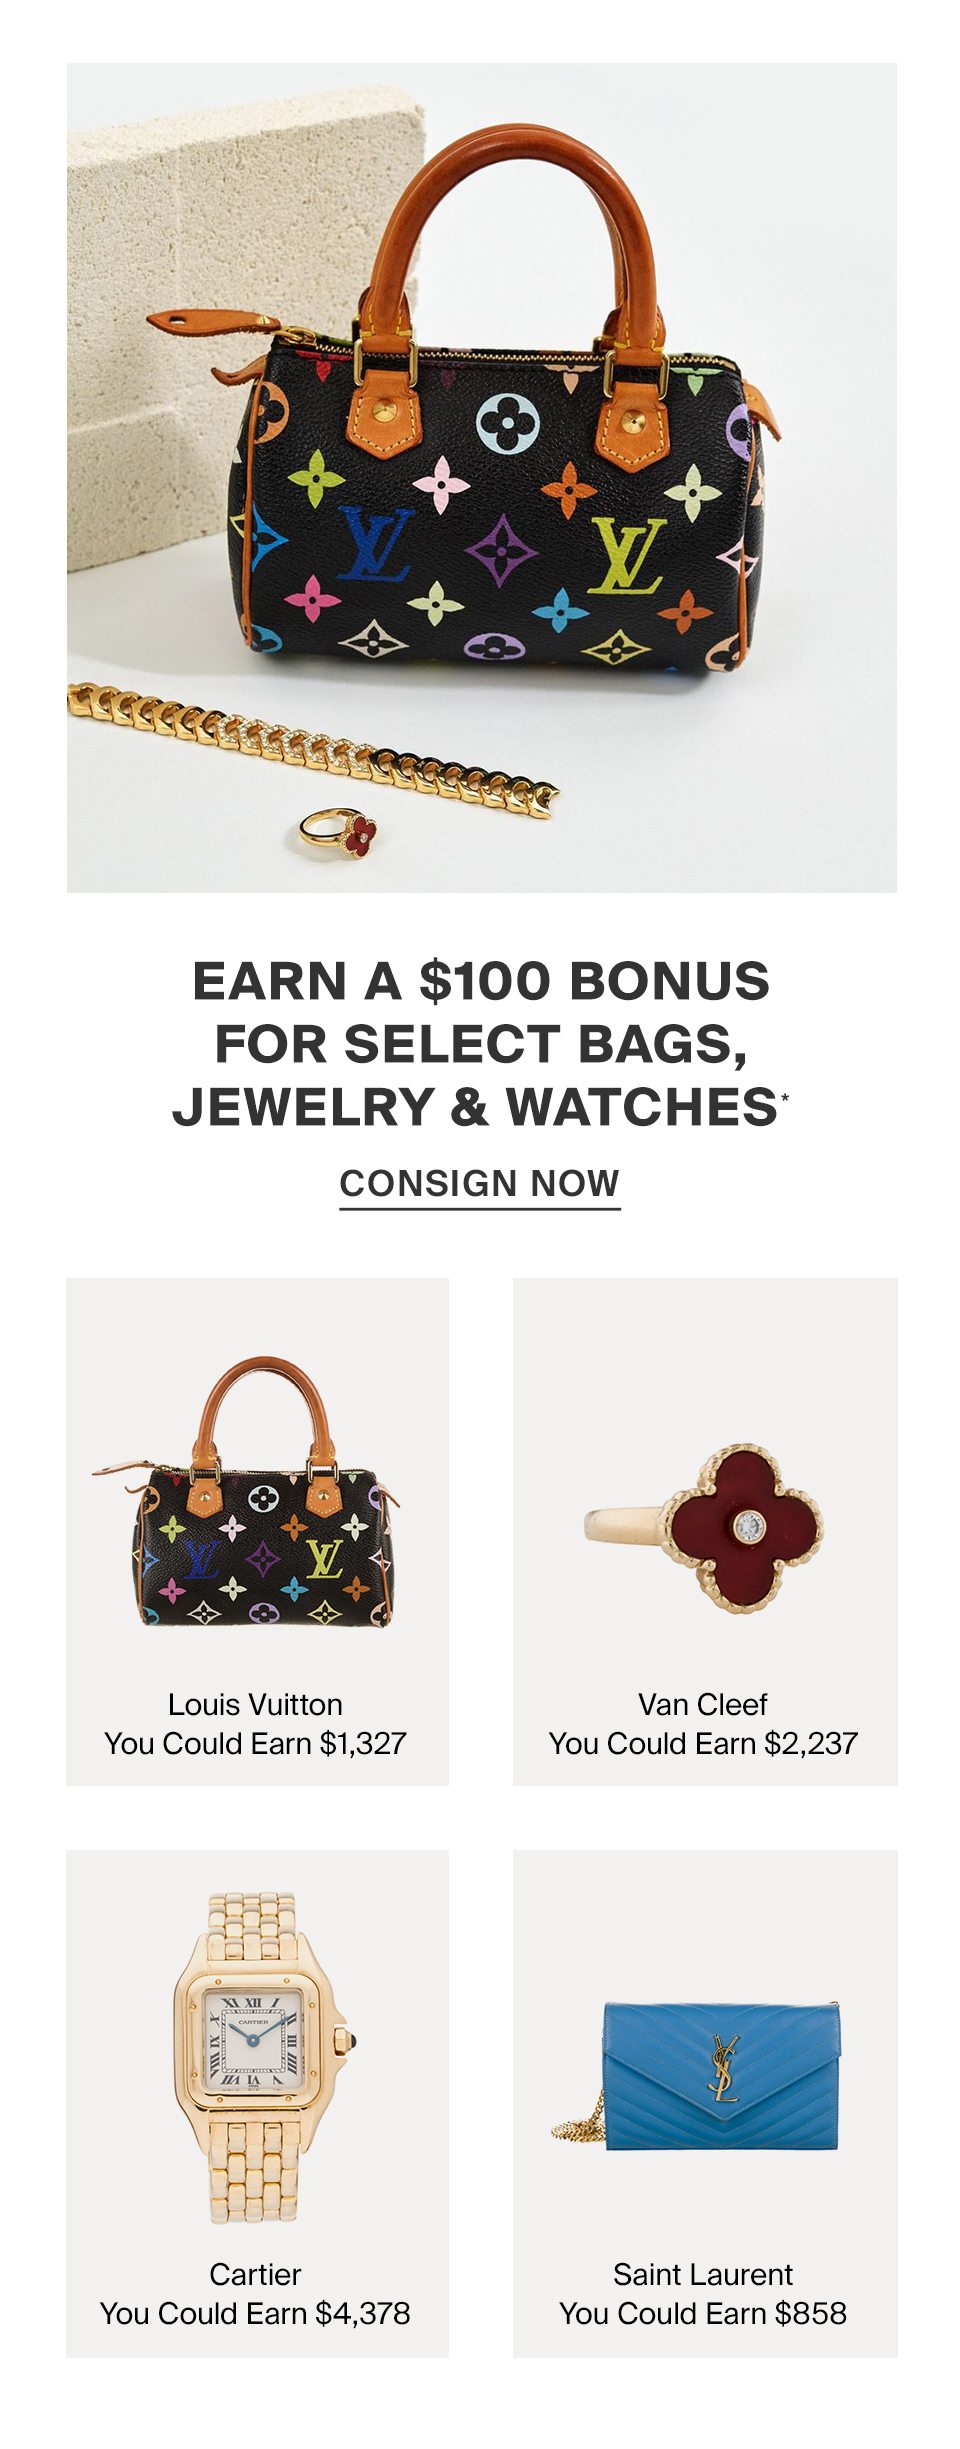 Earn A $100 Bonus For Select Bags, Jewelry & Watches*